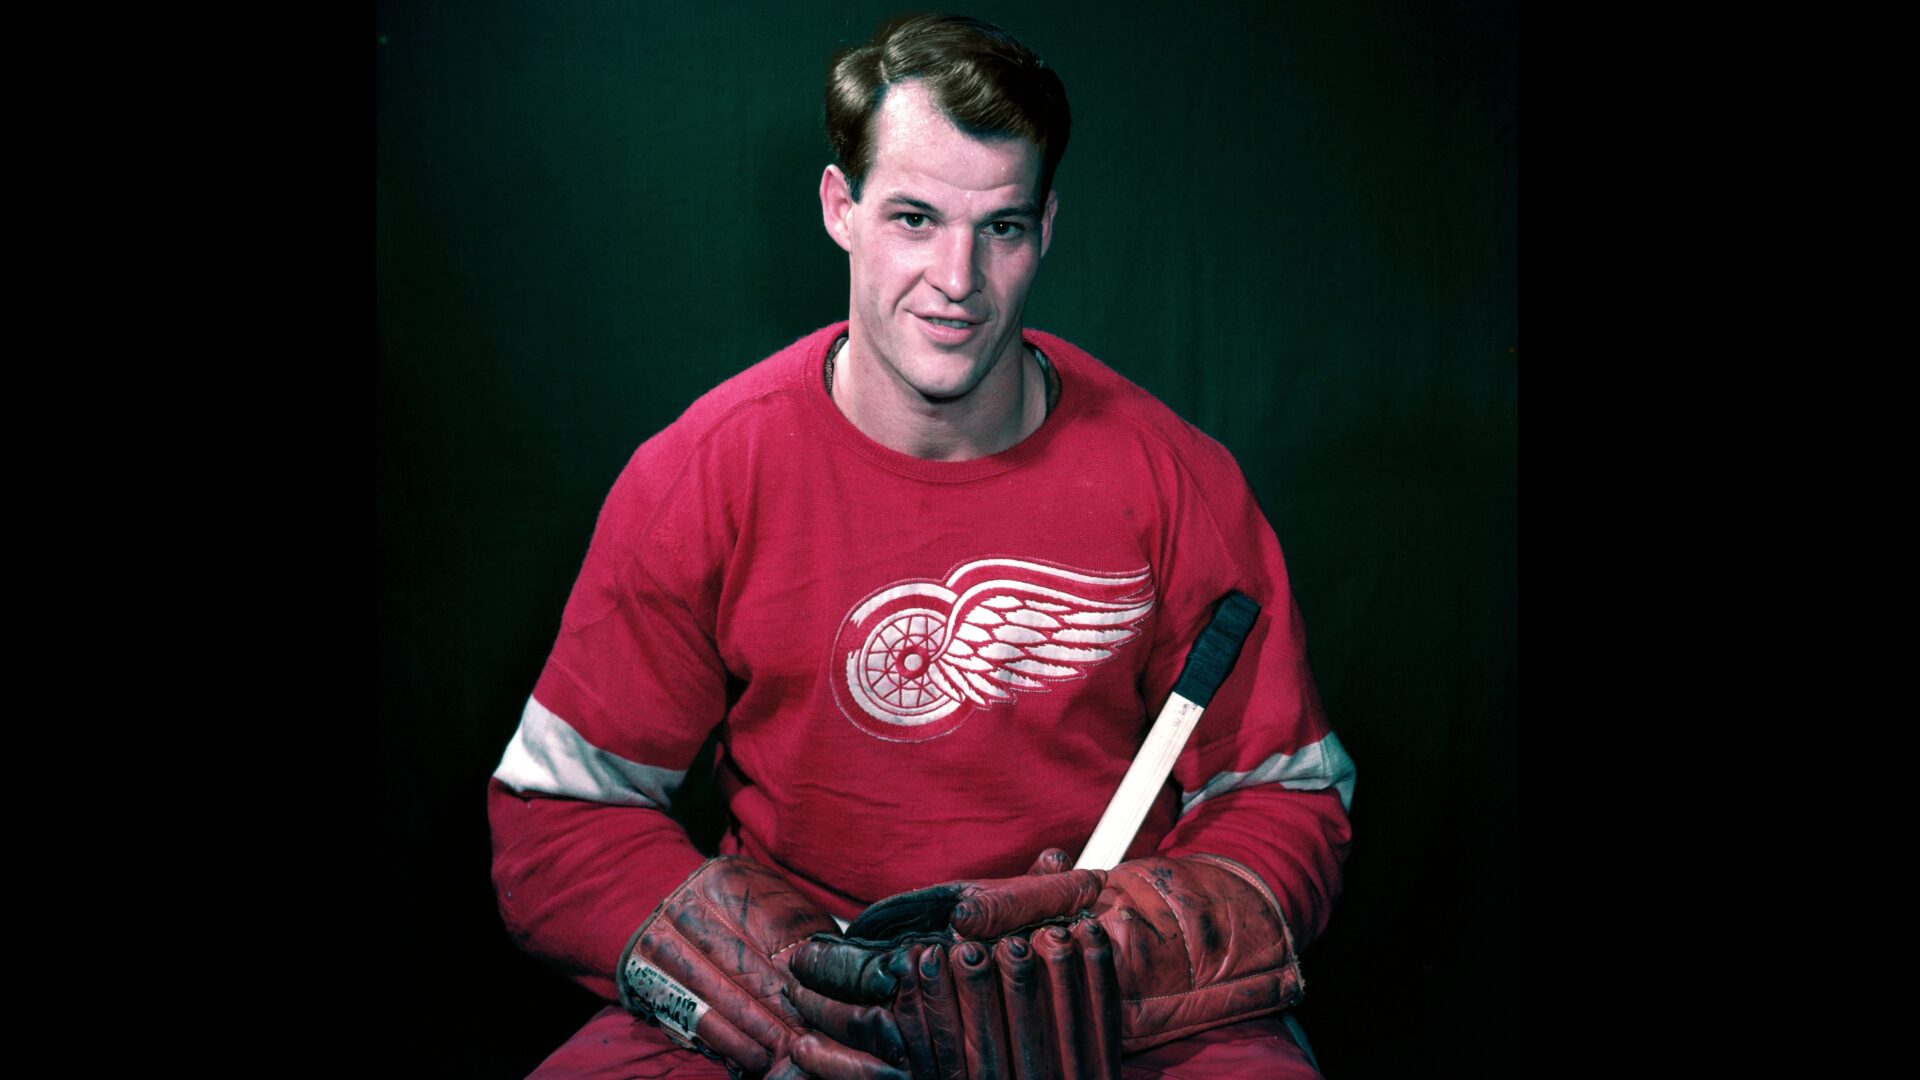 This Day In Hockey History-June 10, 2016- Hockey World Mourns the Loss of Gordie Howe